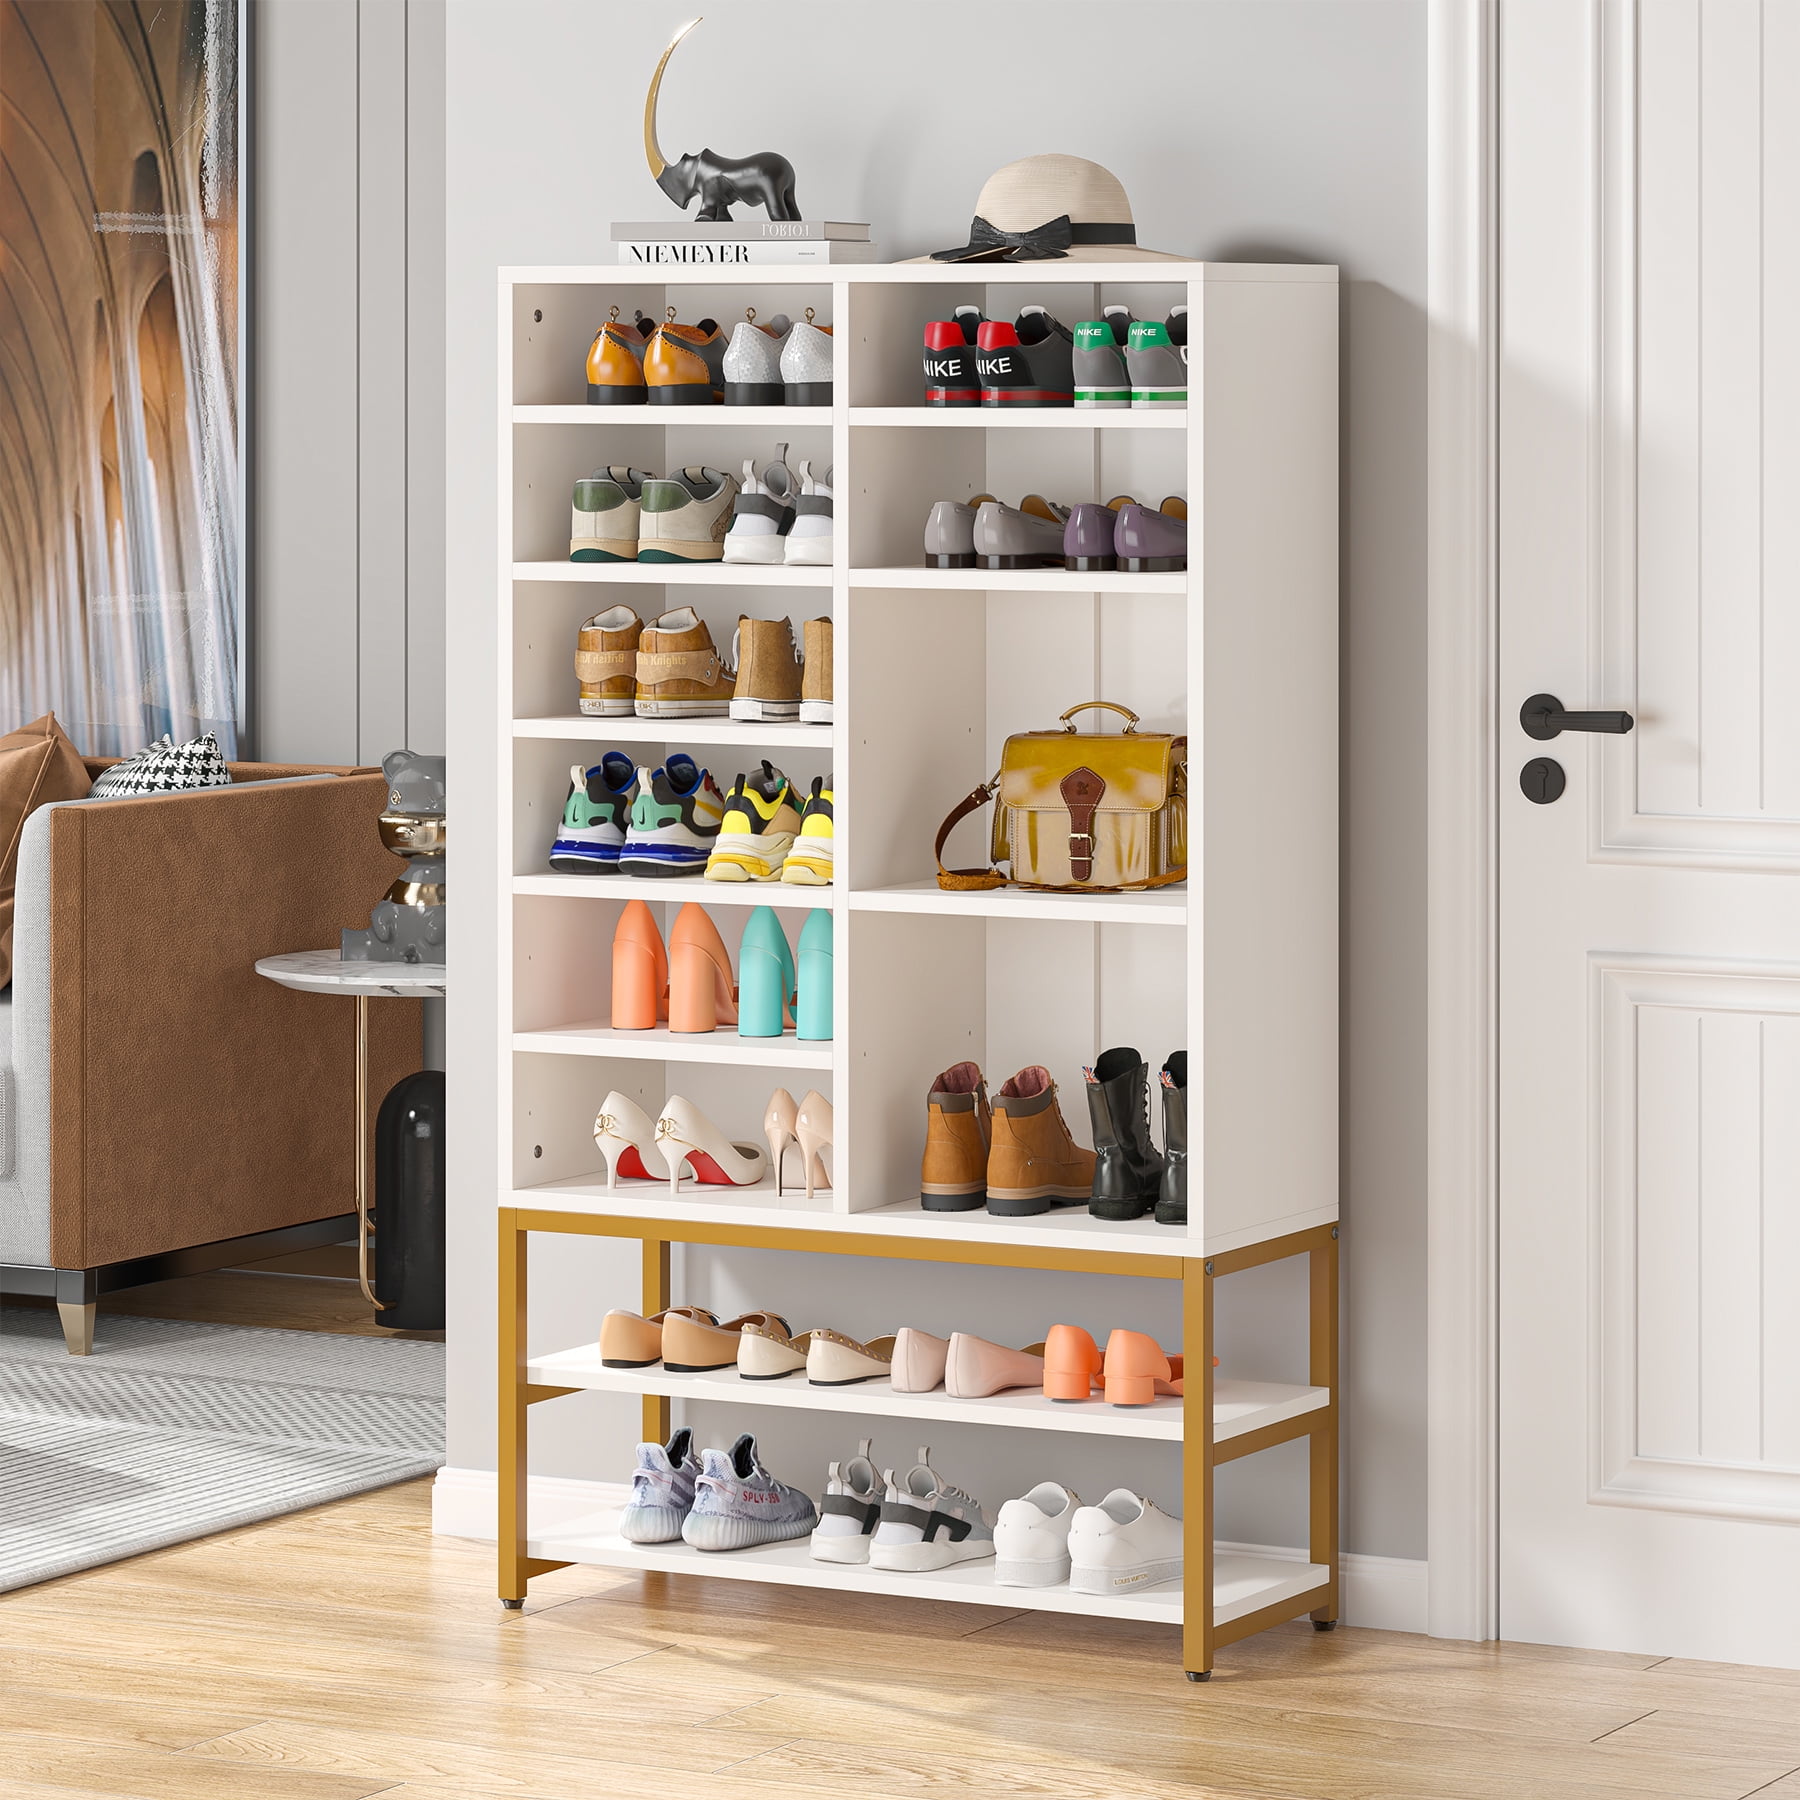 10 Ideas to Store Shoes In Your Entryway